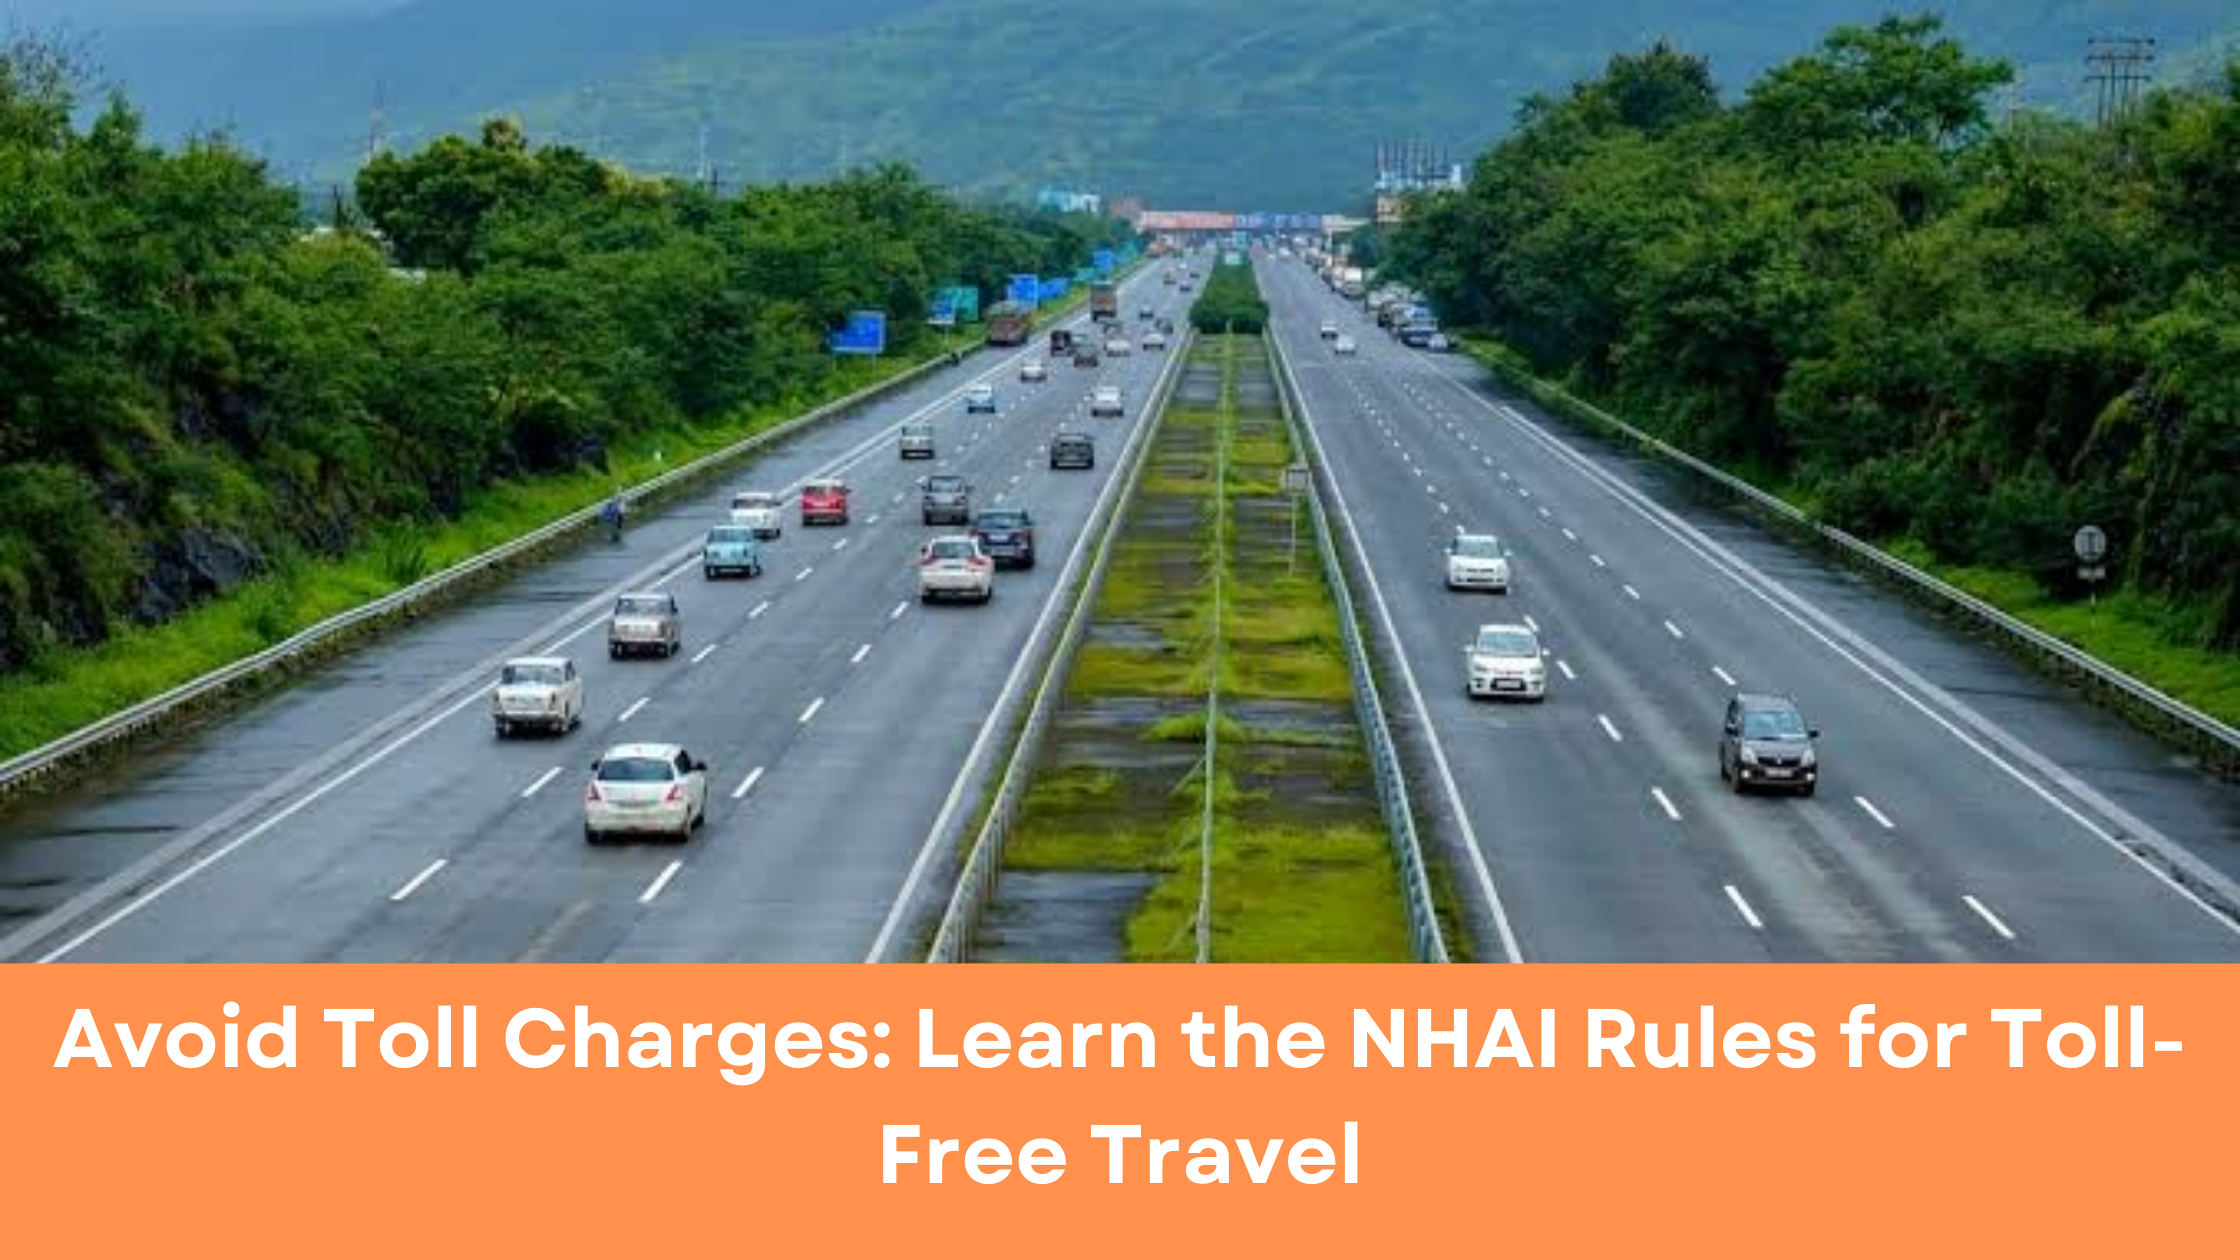 Avoid Toll Charges: Learn the NHAI Rules for Toll-Free Travel